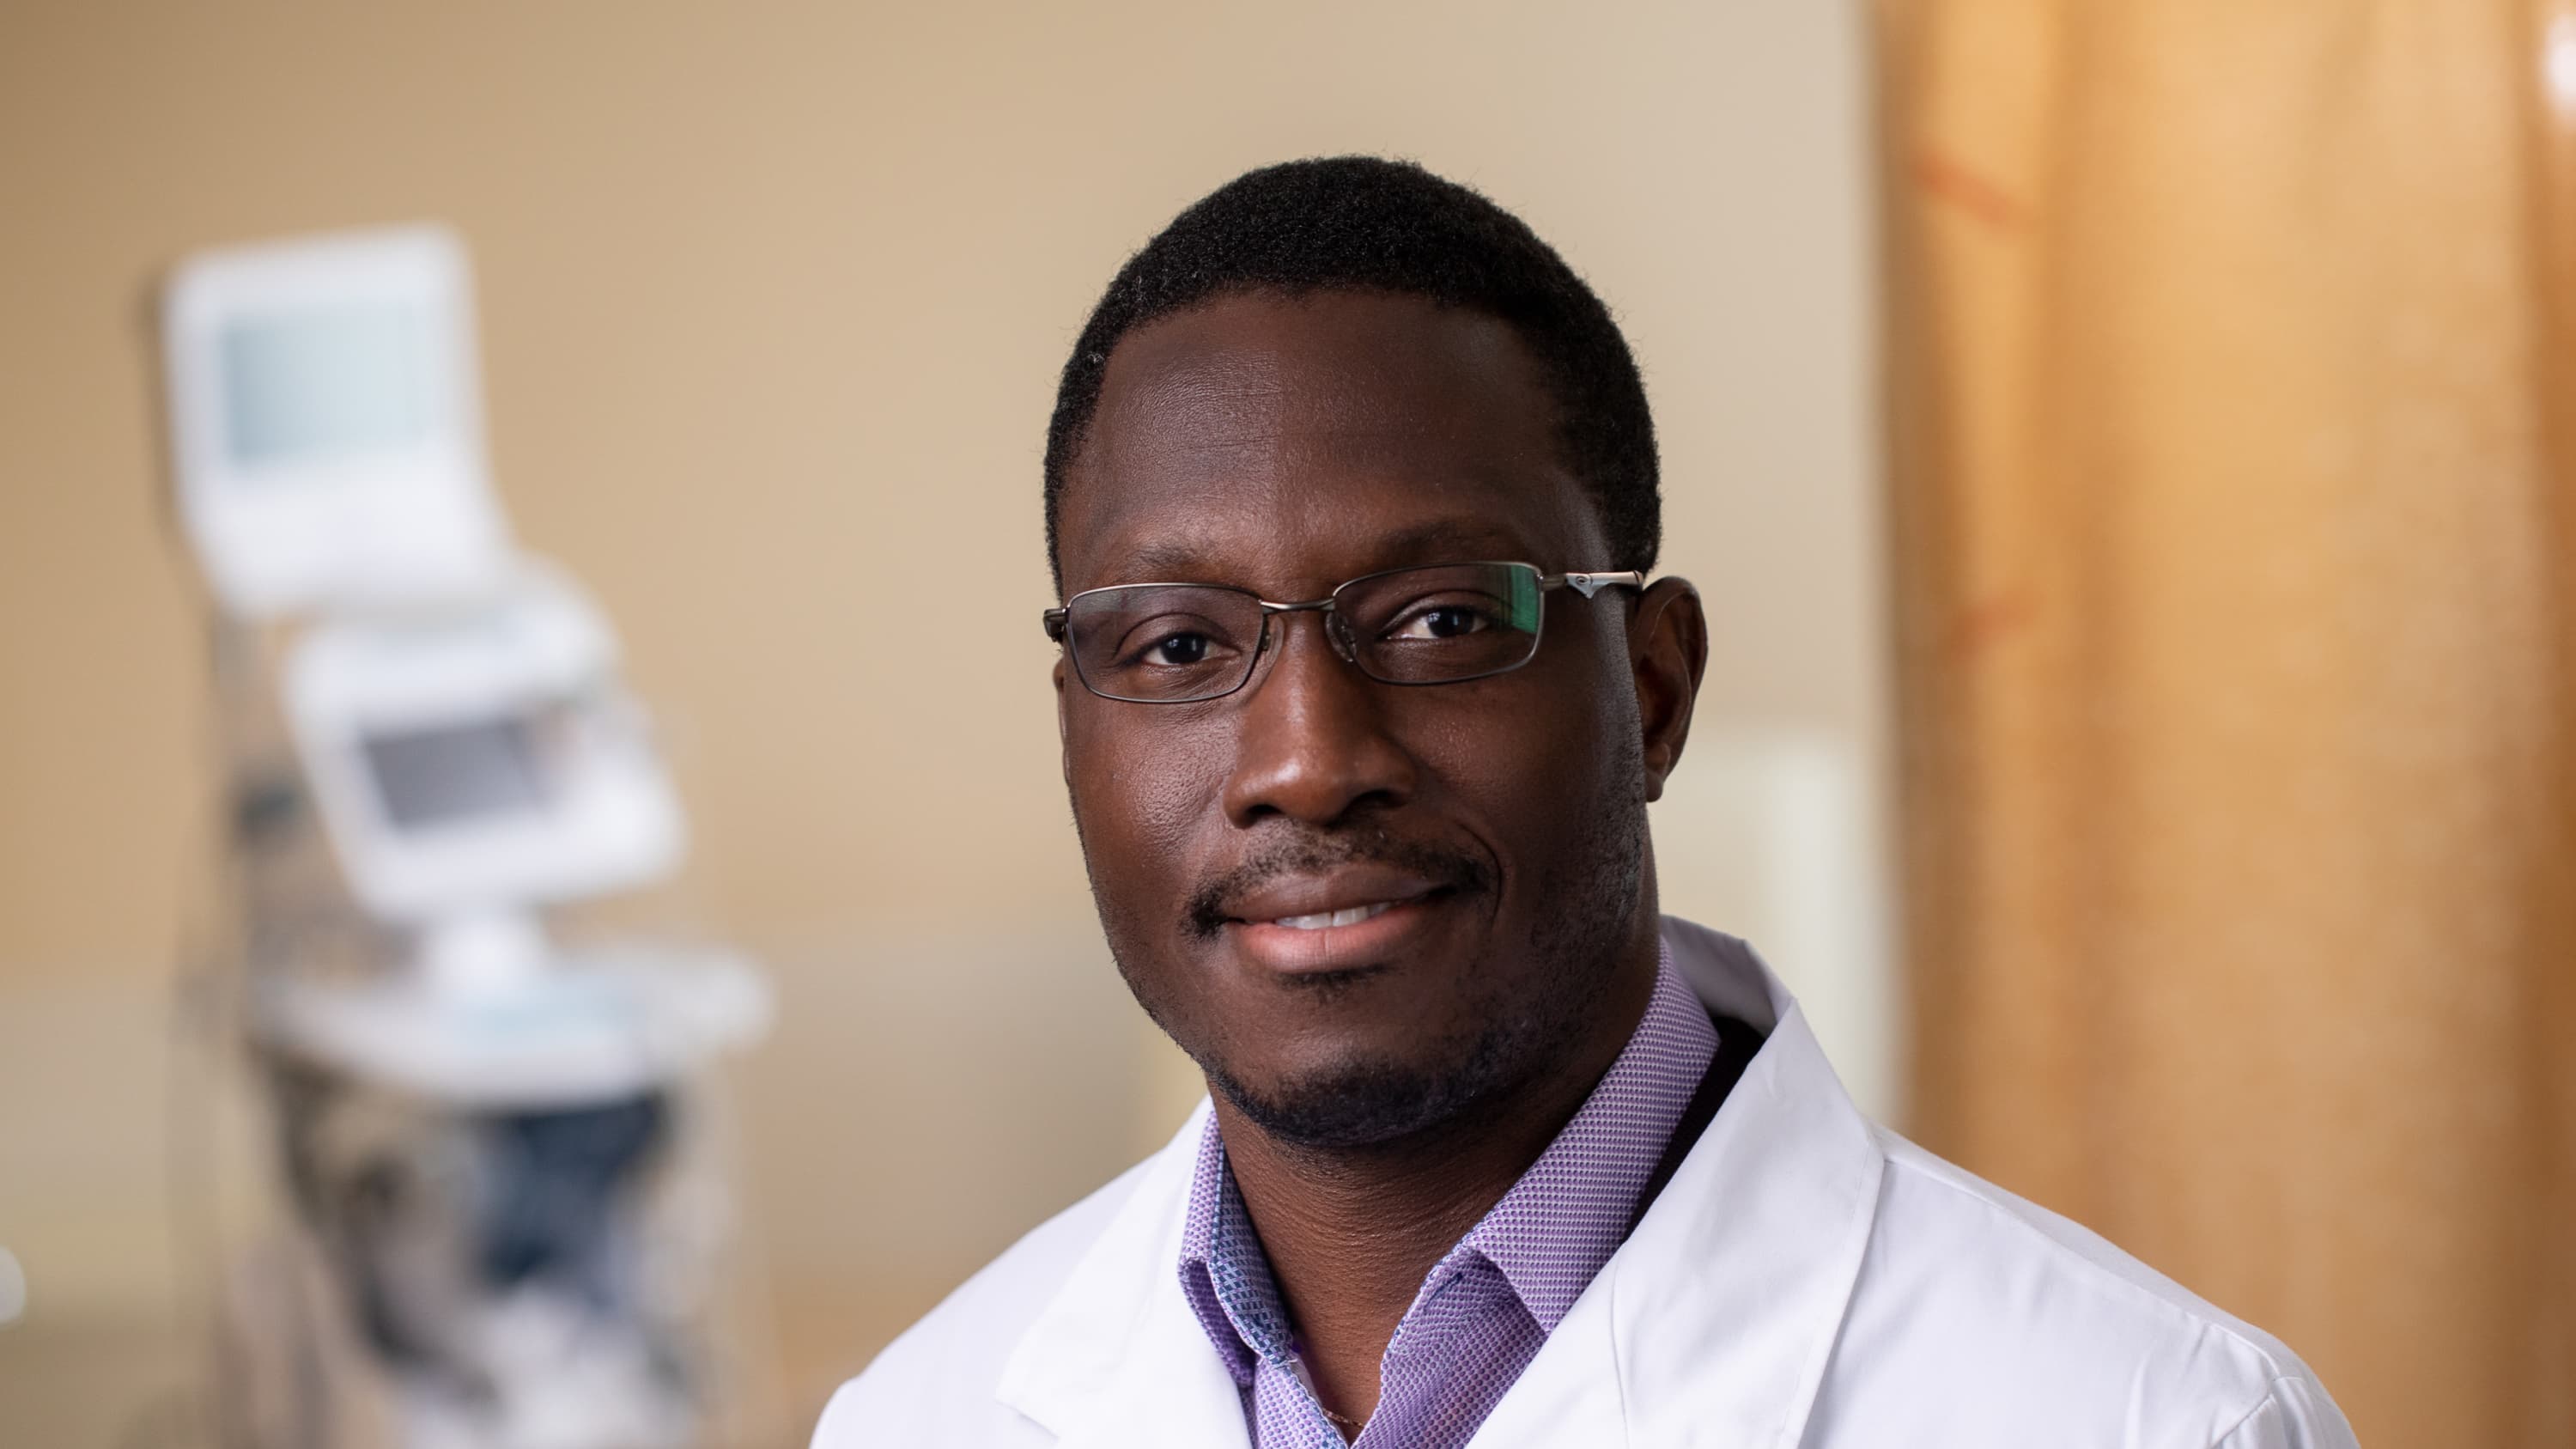 Dr. Ogbuago led clinical trials to test COVID-19 vaccines